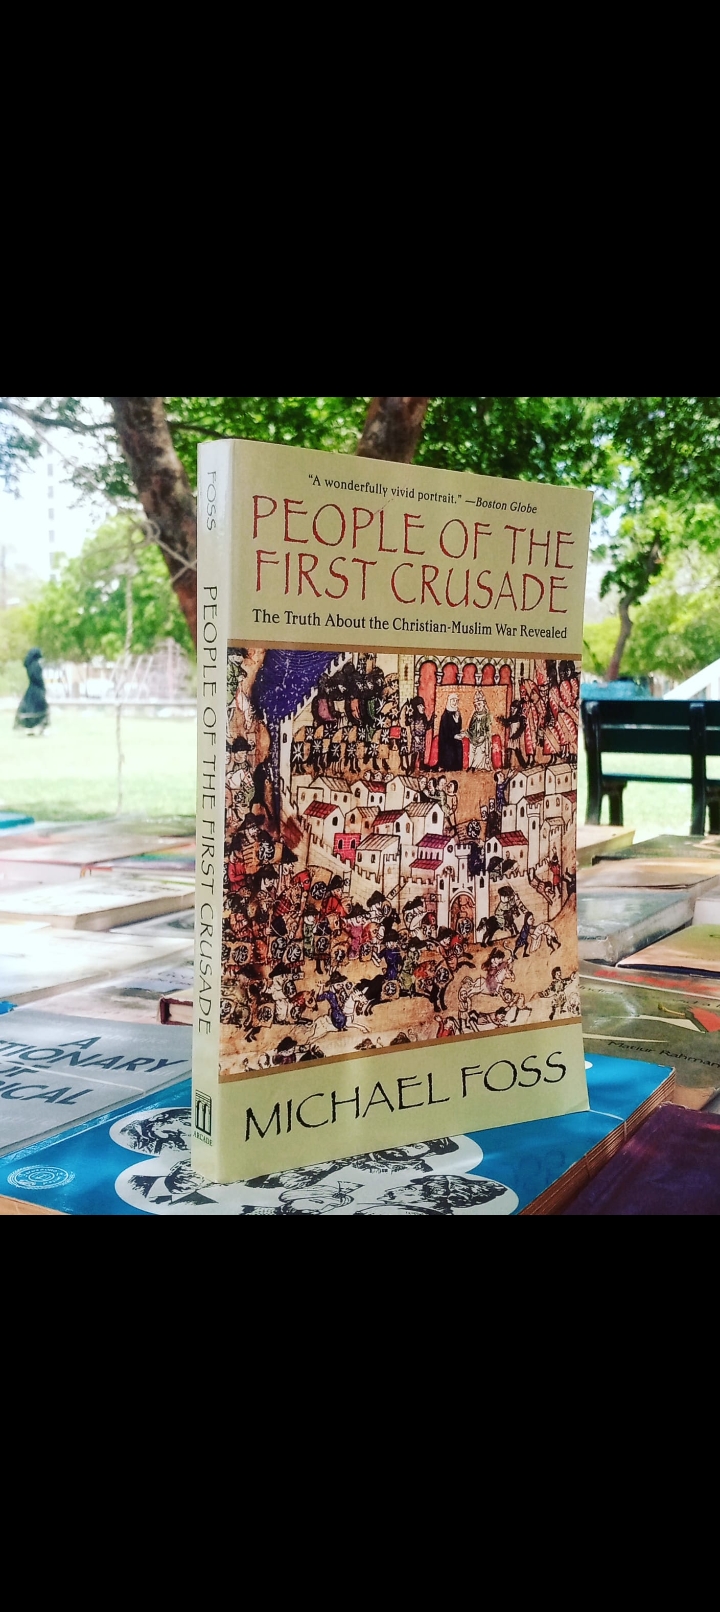 people of the first crusade. the truth about the christian-muslim war revealed by michael foss. orig